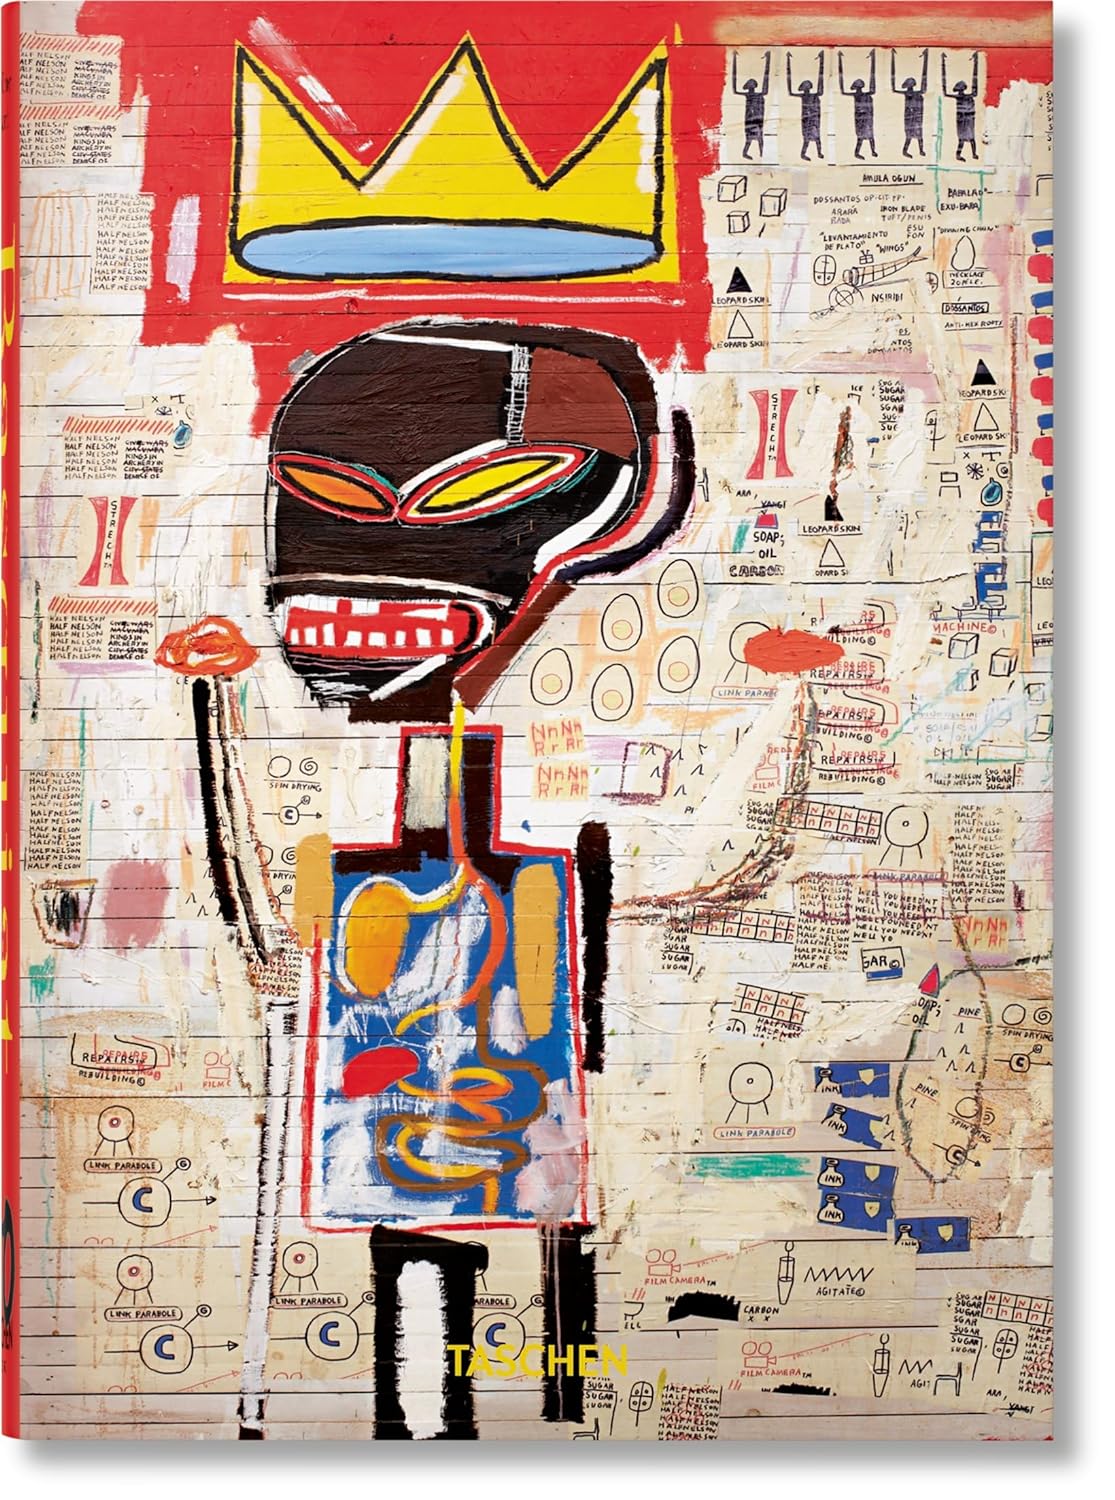 Amazon affiliate link to the book Jean-Michel Basquiat. 40th Ed. (40th Edition) Hardcover by Eleanor Nairne